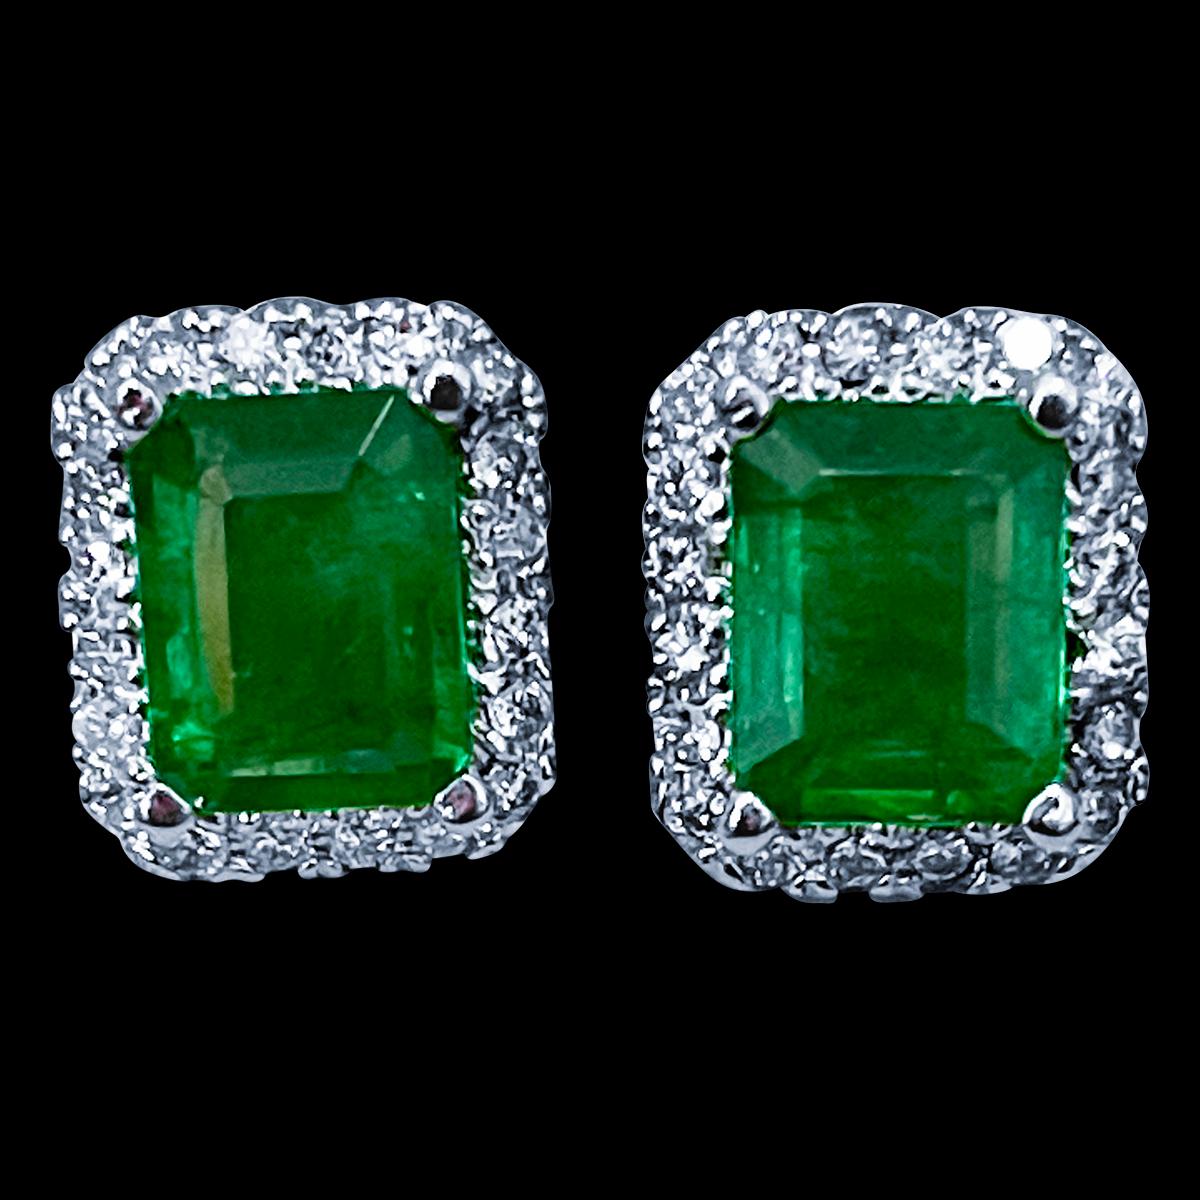 6.5 Carat Emerald Cut Emerald & 1.25 Ct  Diamond Stud Earrings 14 Kt White Gold
This exquisite pair of earrings are beautifully crafted with 14 karat White gold .
Weight of 14 K gold 6 Grams with emeralds
Each emerald is approximately 3.25 ct
Origin